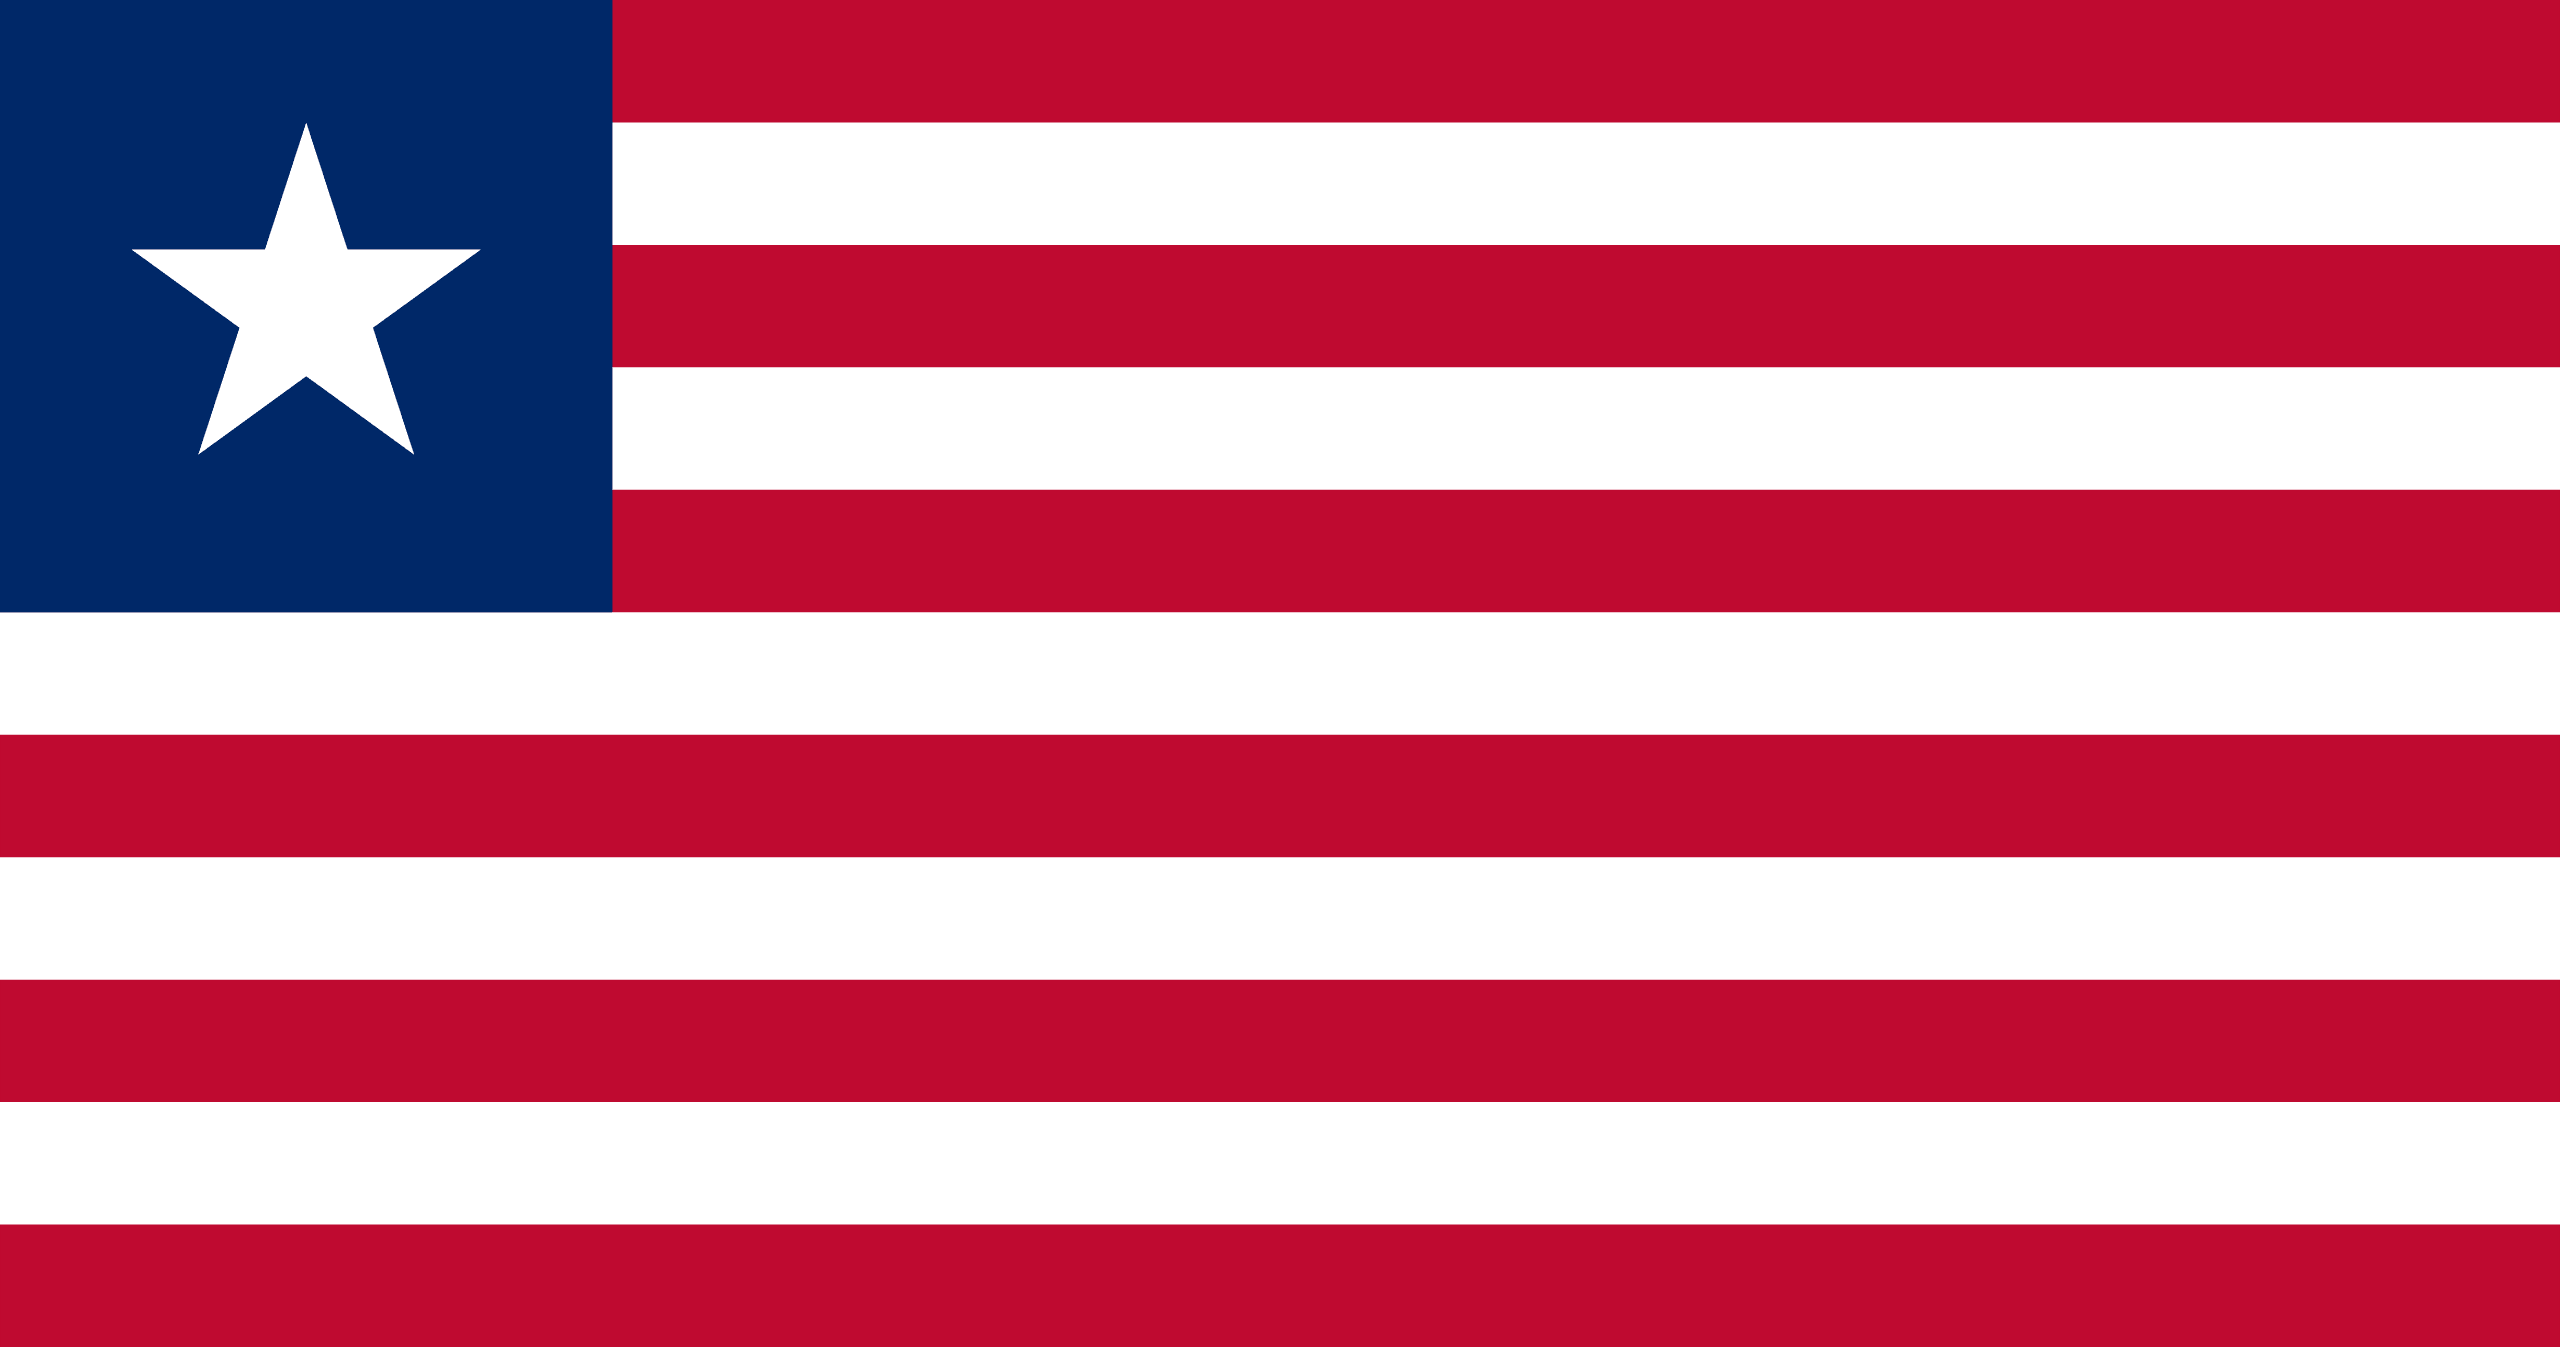 Liberia national anthem song